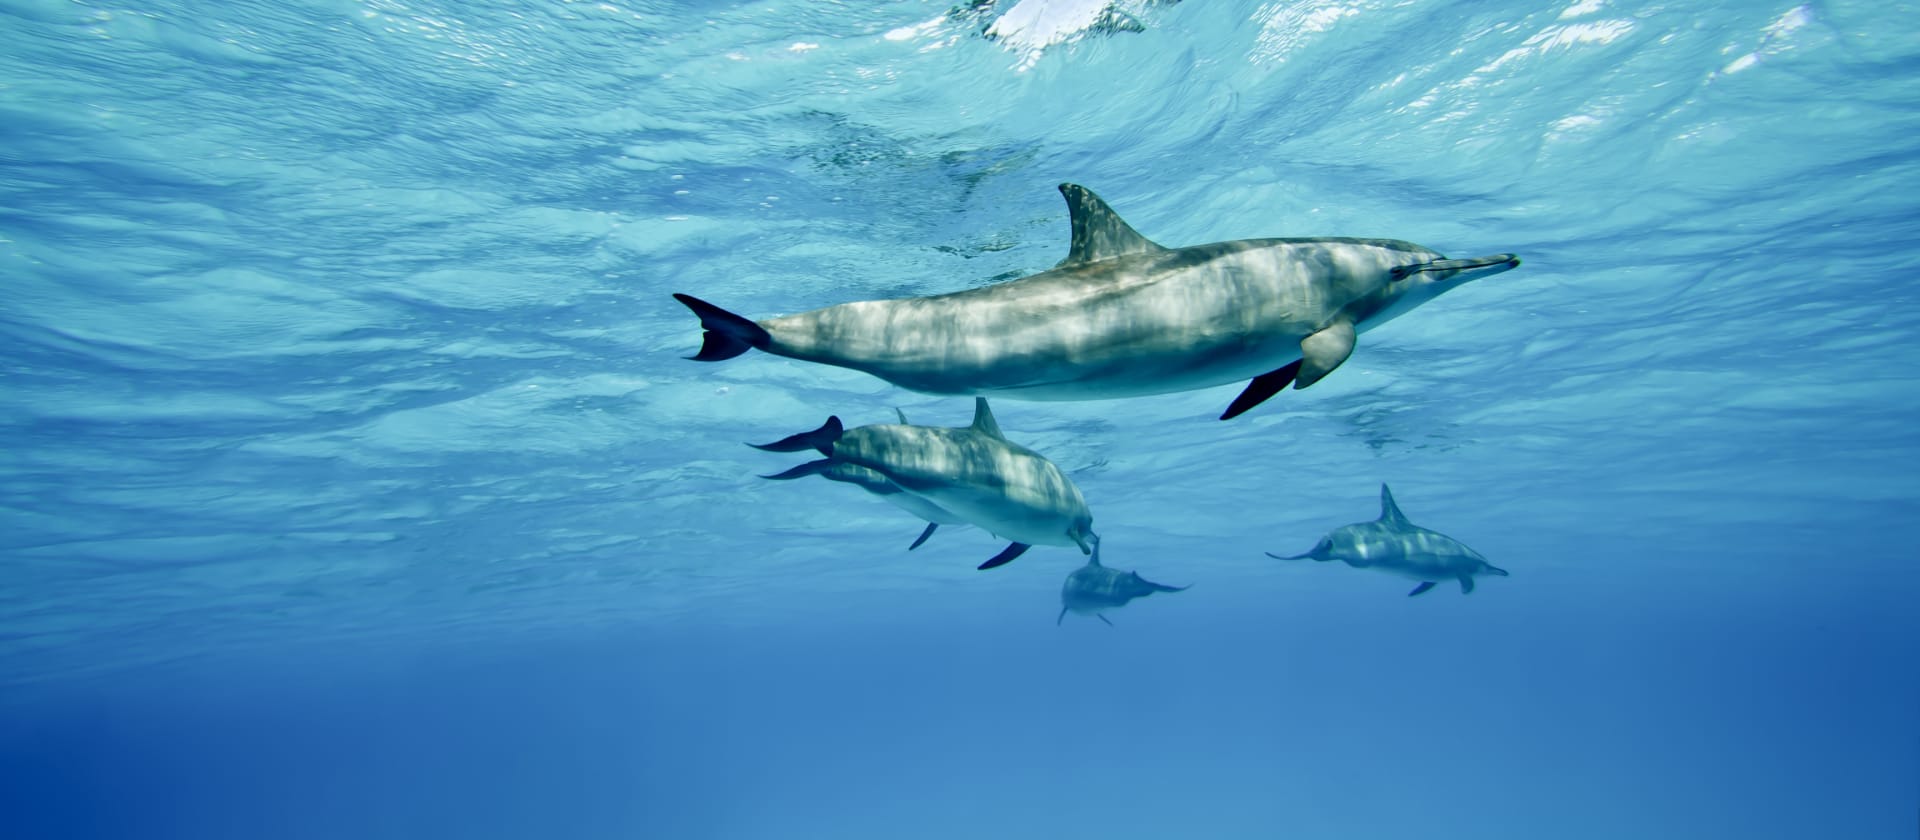 The BEAT, Epigenetic Aging in Bottlenose Dolphins